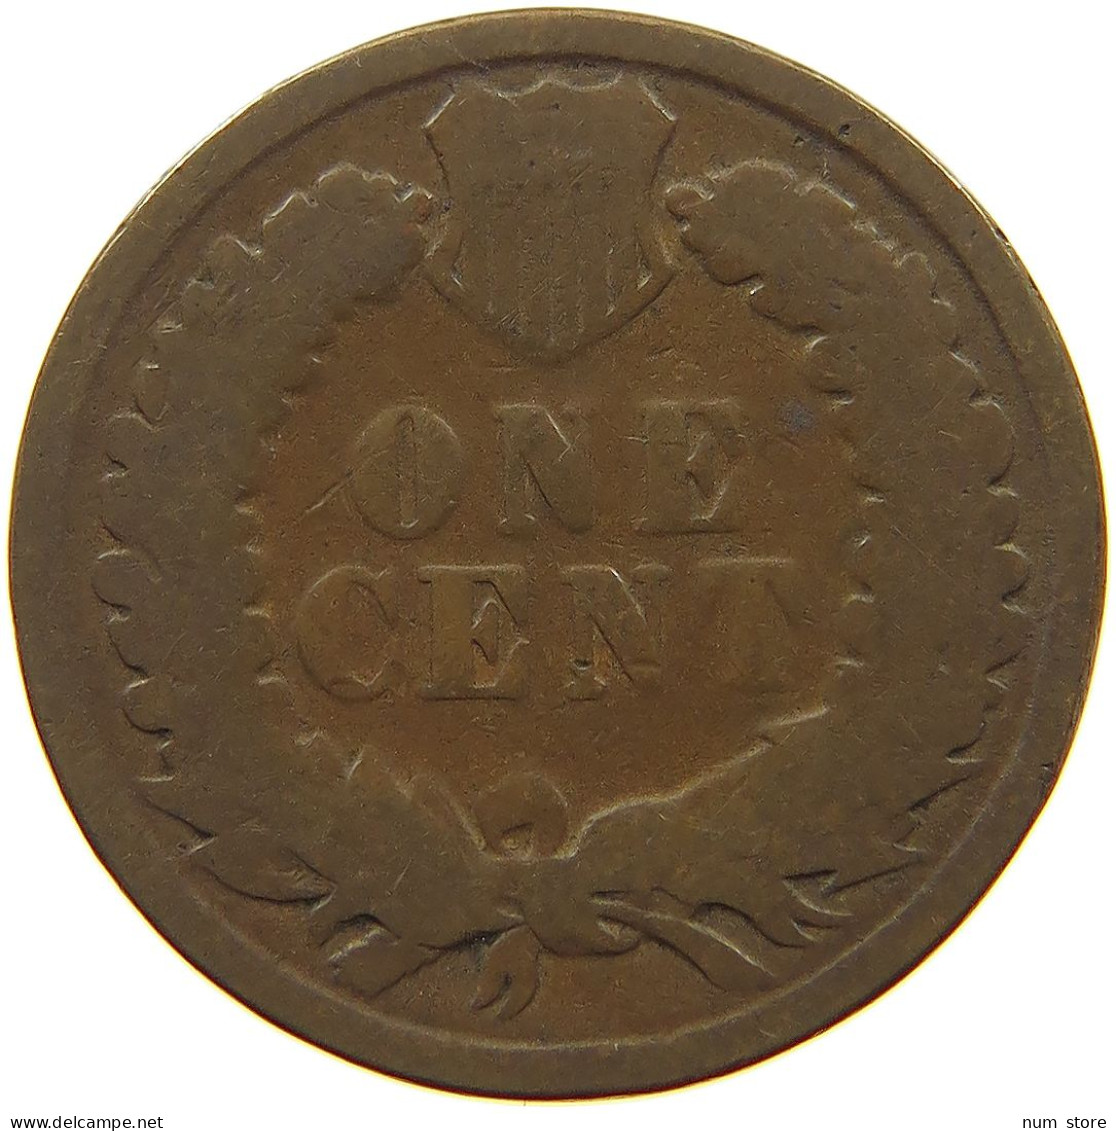 UNITED STATES OF AMERICA CENT 1886 INDIAN HEAD #s063 0395 - 1859-1909: Indian Head